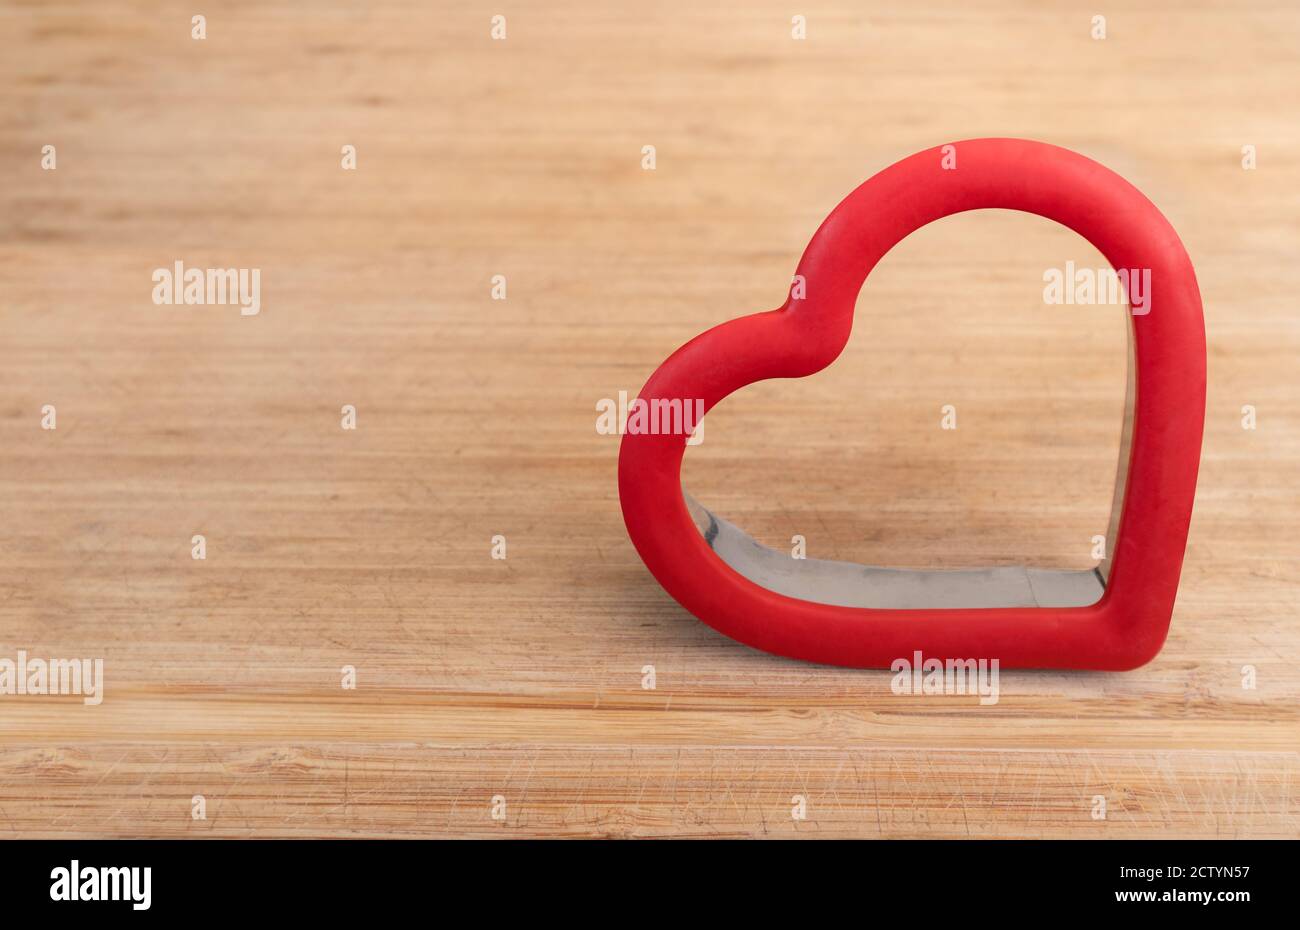 Red heart shaped cookie cutter on wood cutting board. Concept about love. Copy space. Stock Photo